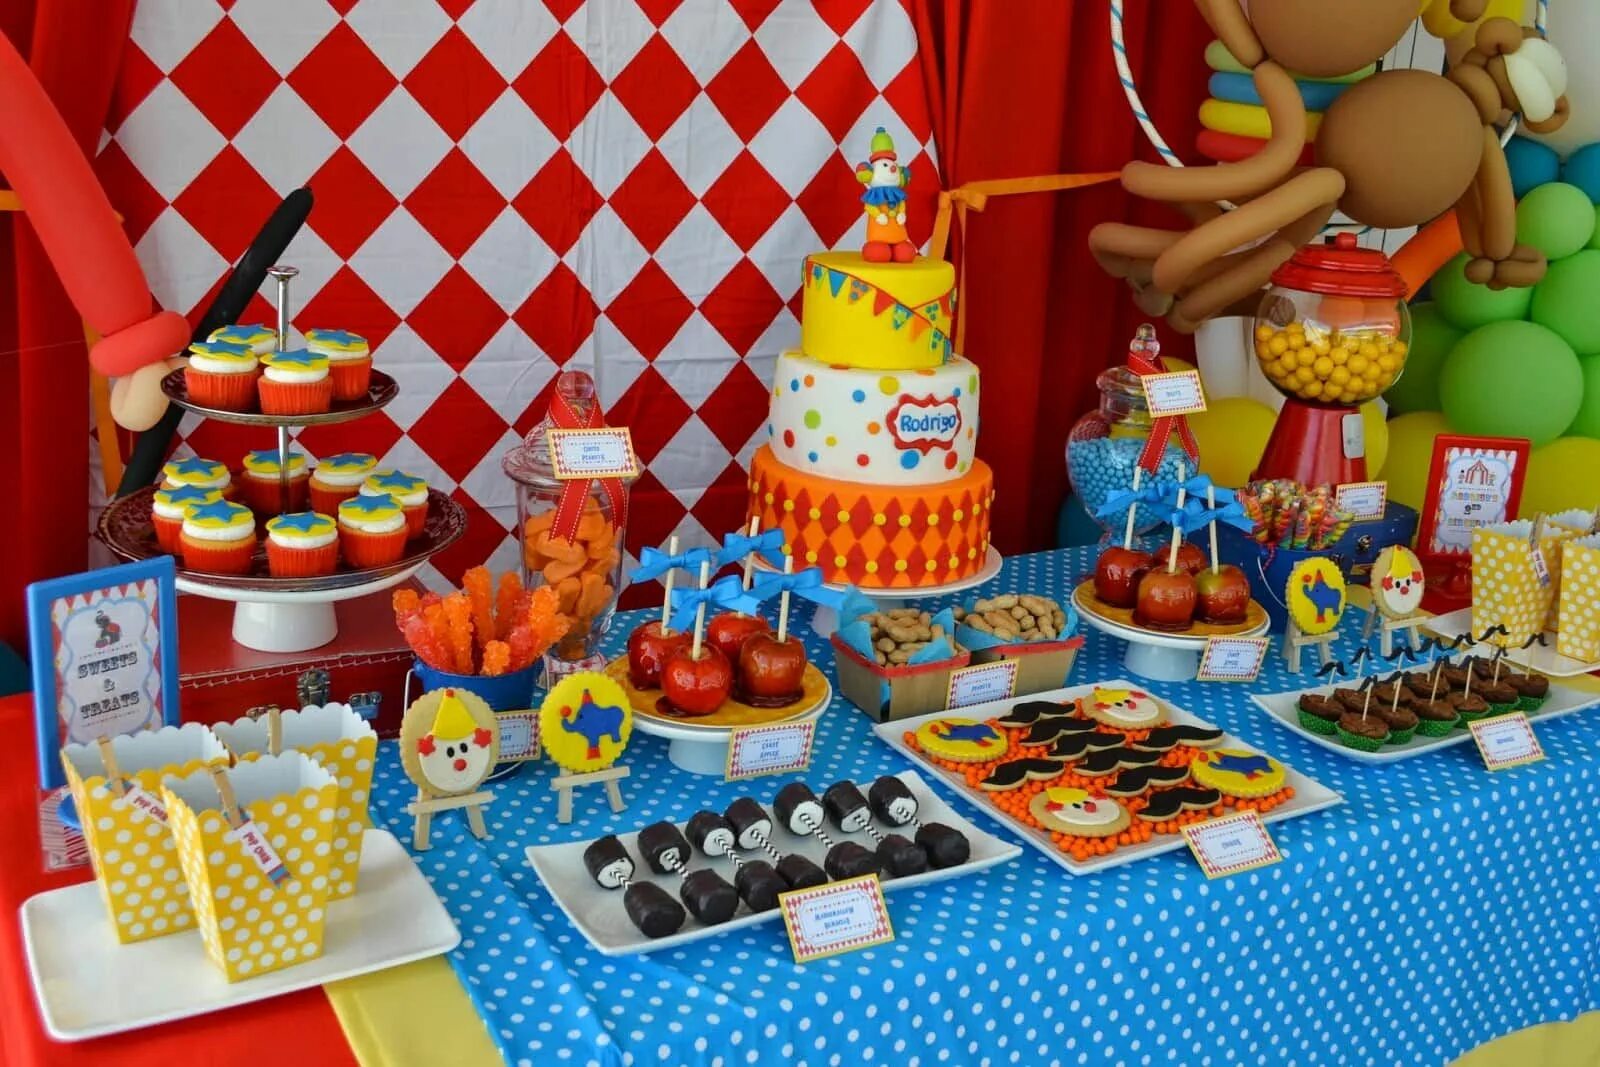 The Birthday Party. Birthday Party activities. Birthday Party ideas. Boy Birthday Party.